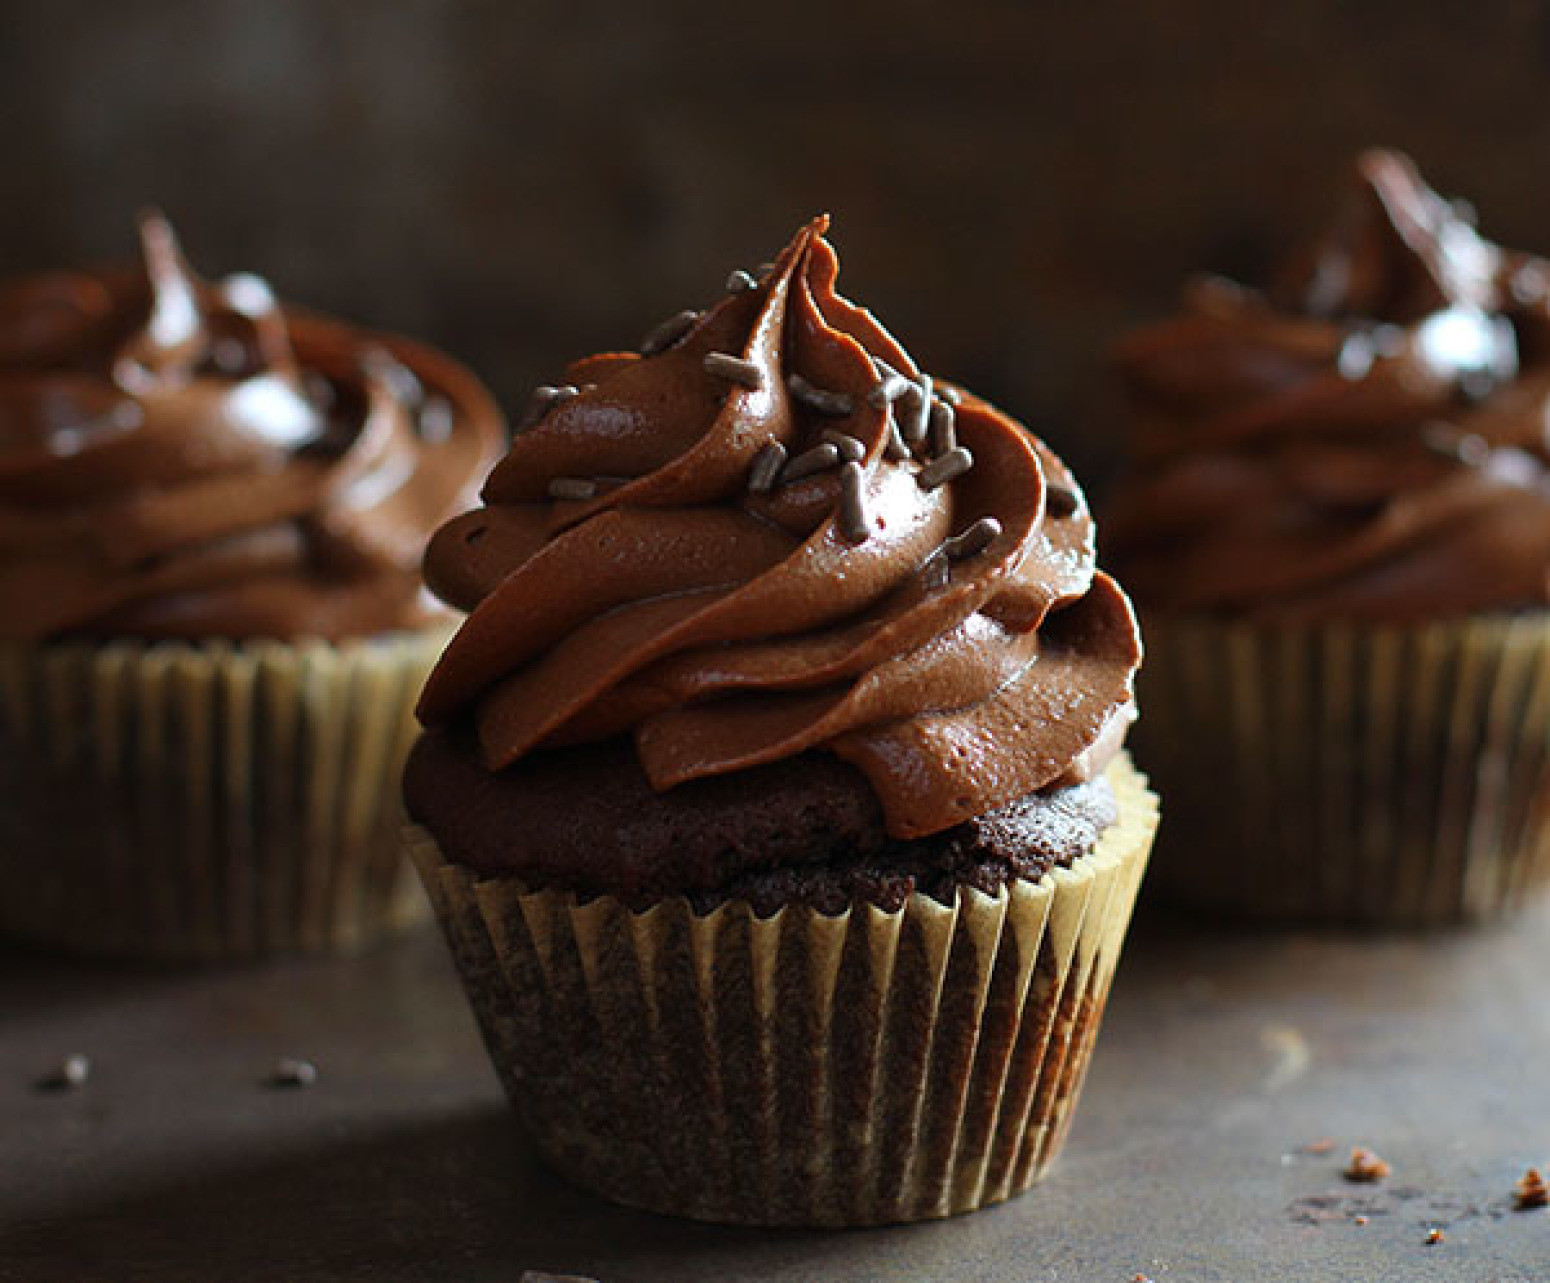 Chocolate Cupcakes with Cream Cheese Frosting New Ultimate Chocolate Cupcakes with Ultimate Chocolate Cream